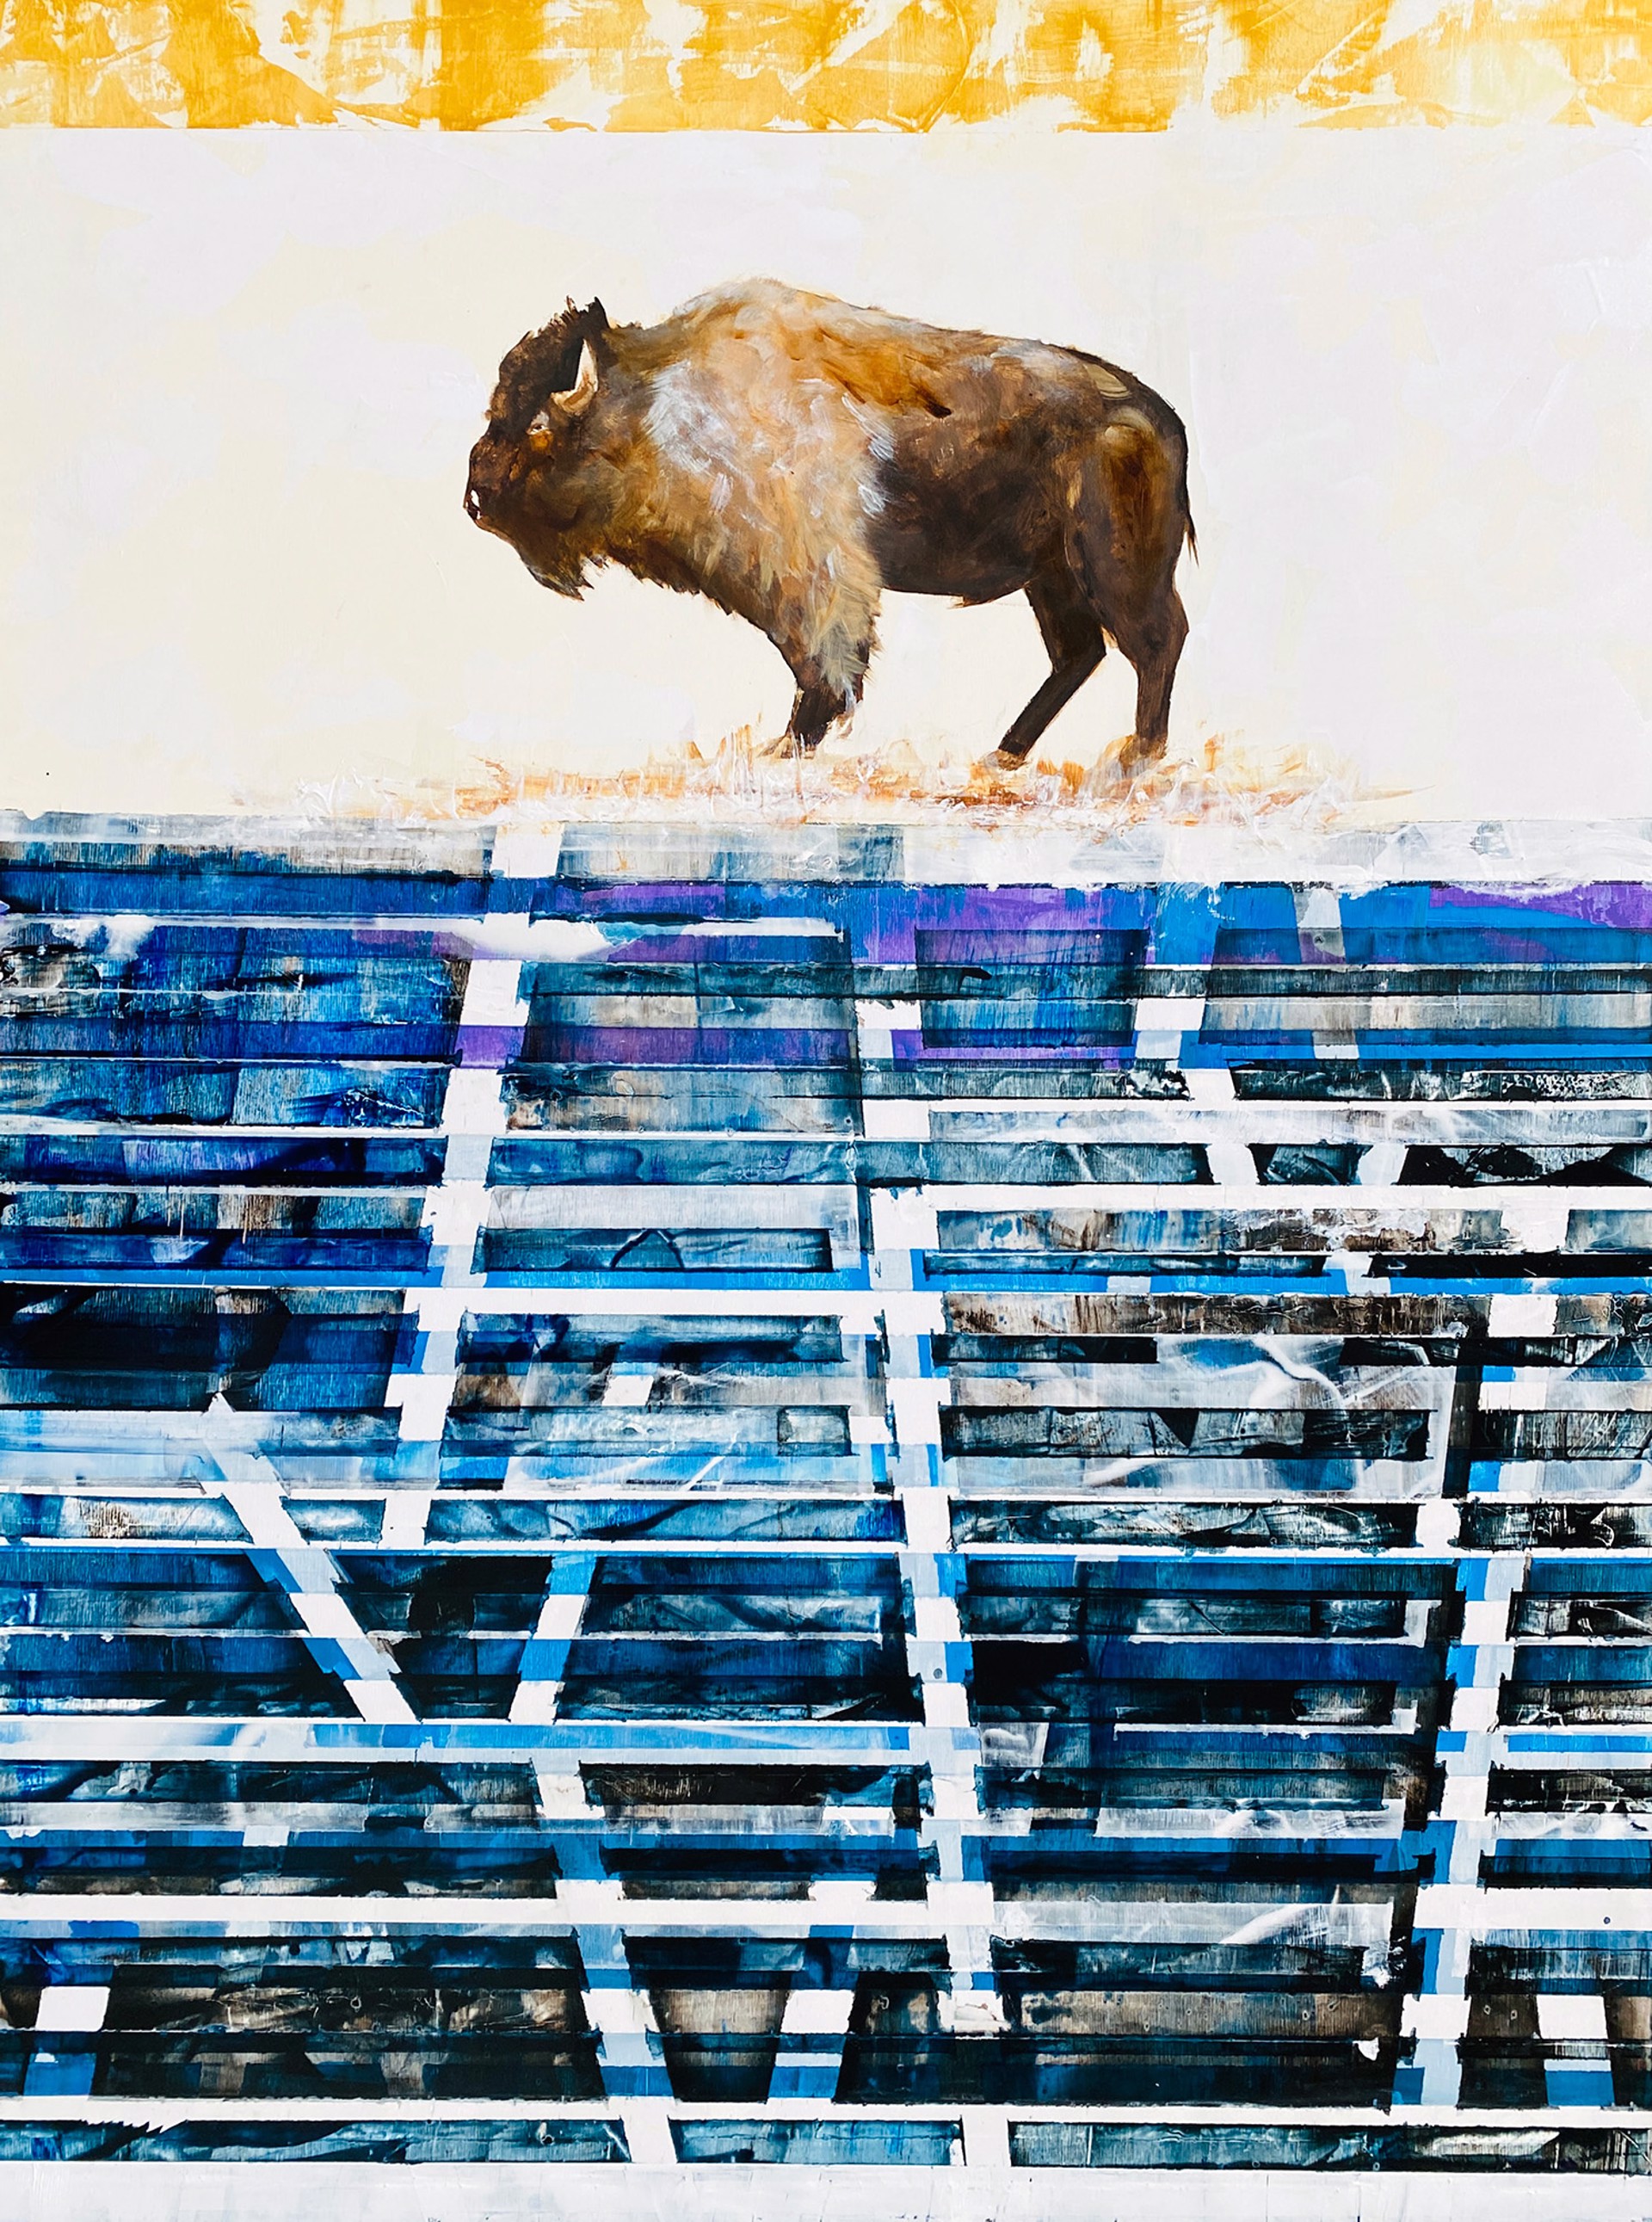 Original Oil Painting By Jenna Von Benedikt Of A Lone Bison On A Blue Abstract Background